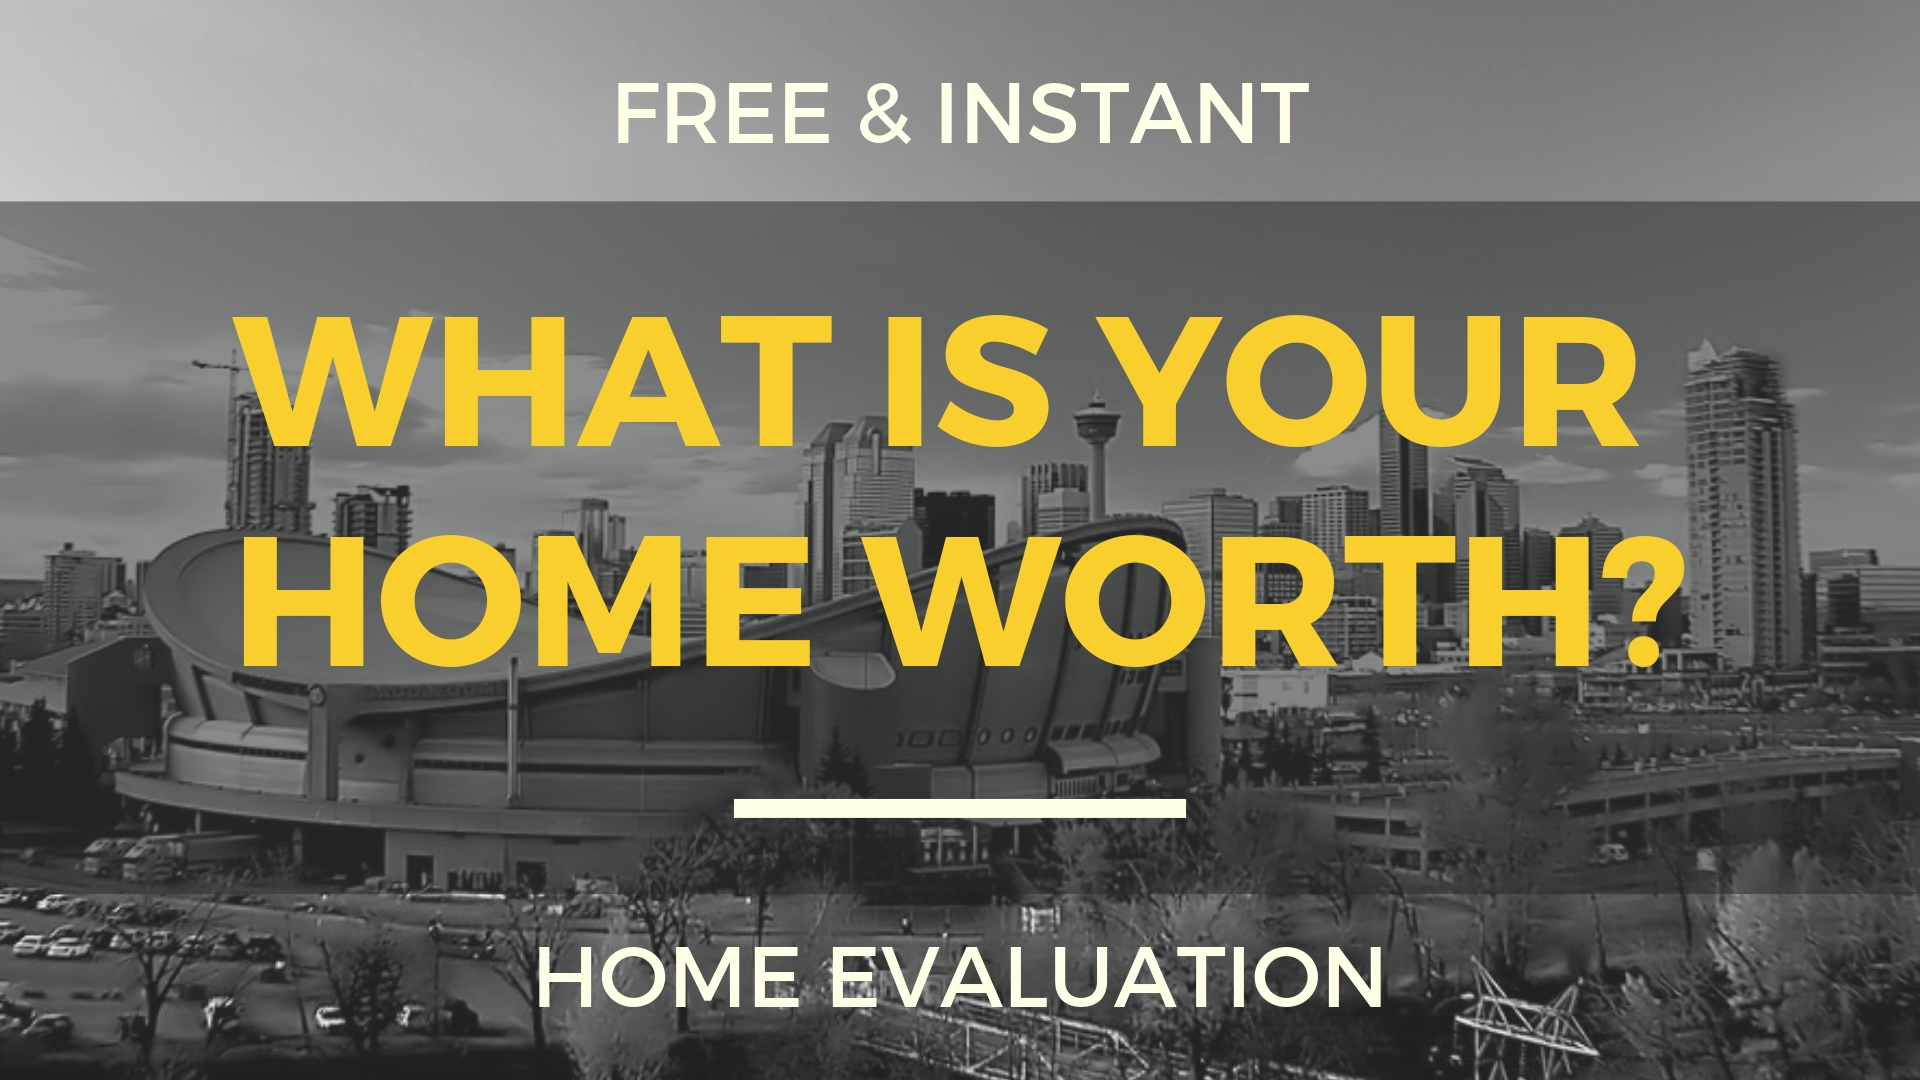 Free and Instant Home Evaluation